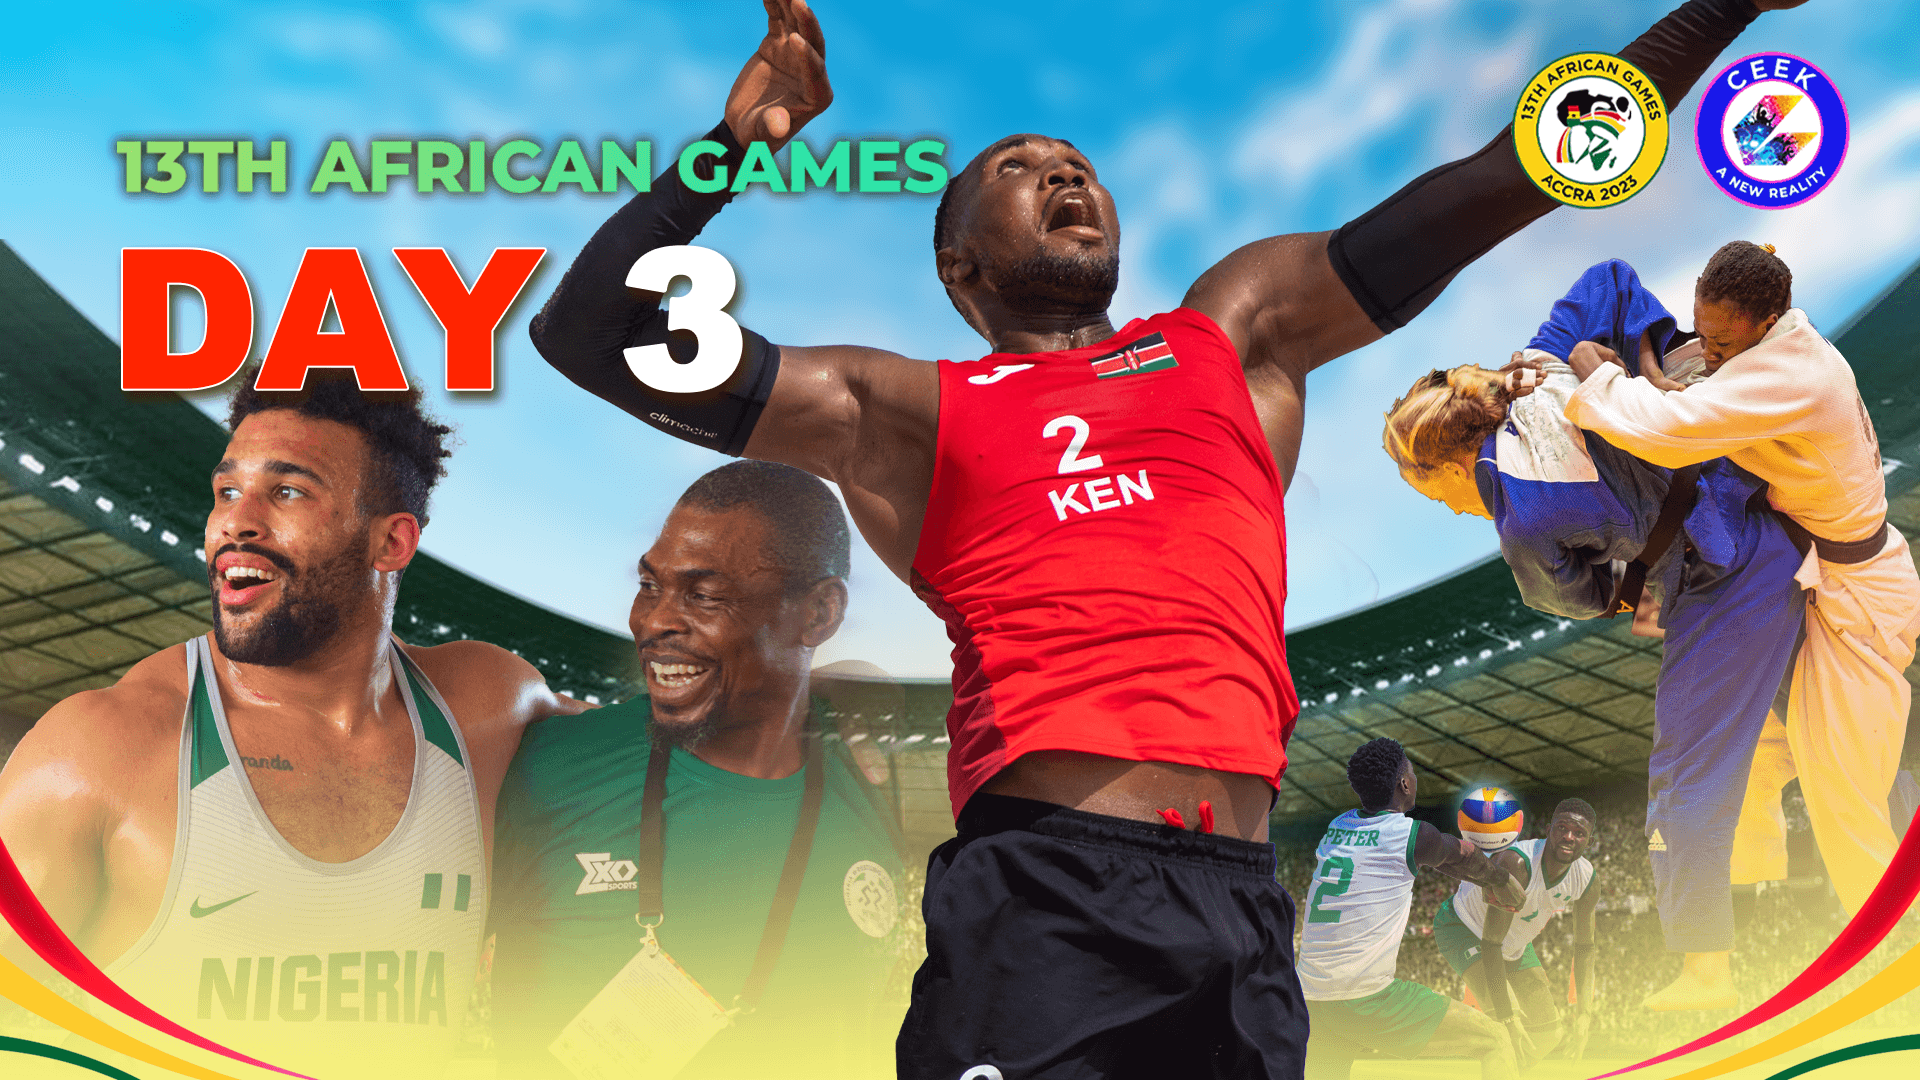 Accra African Games 12th March